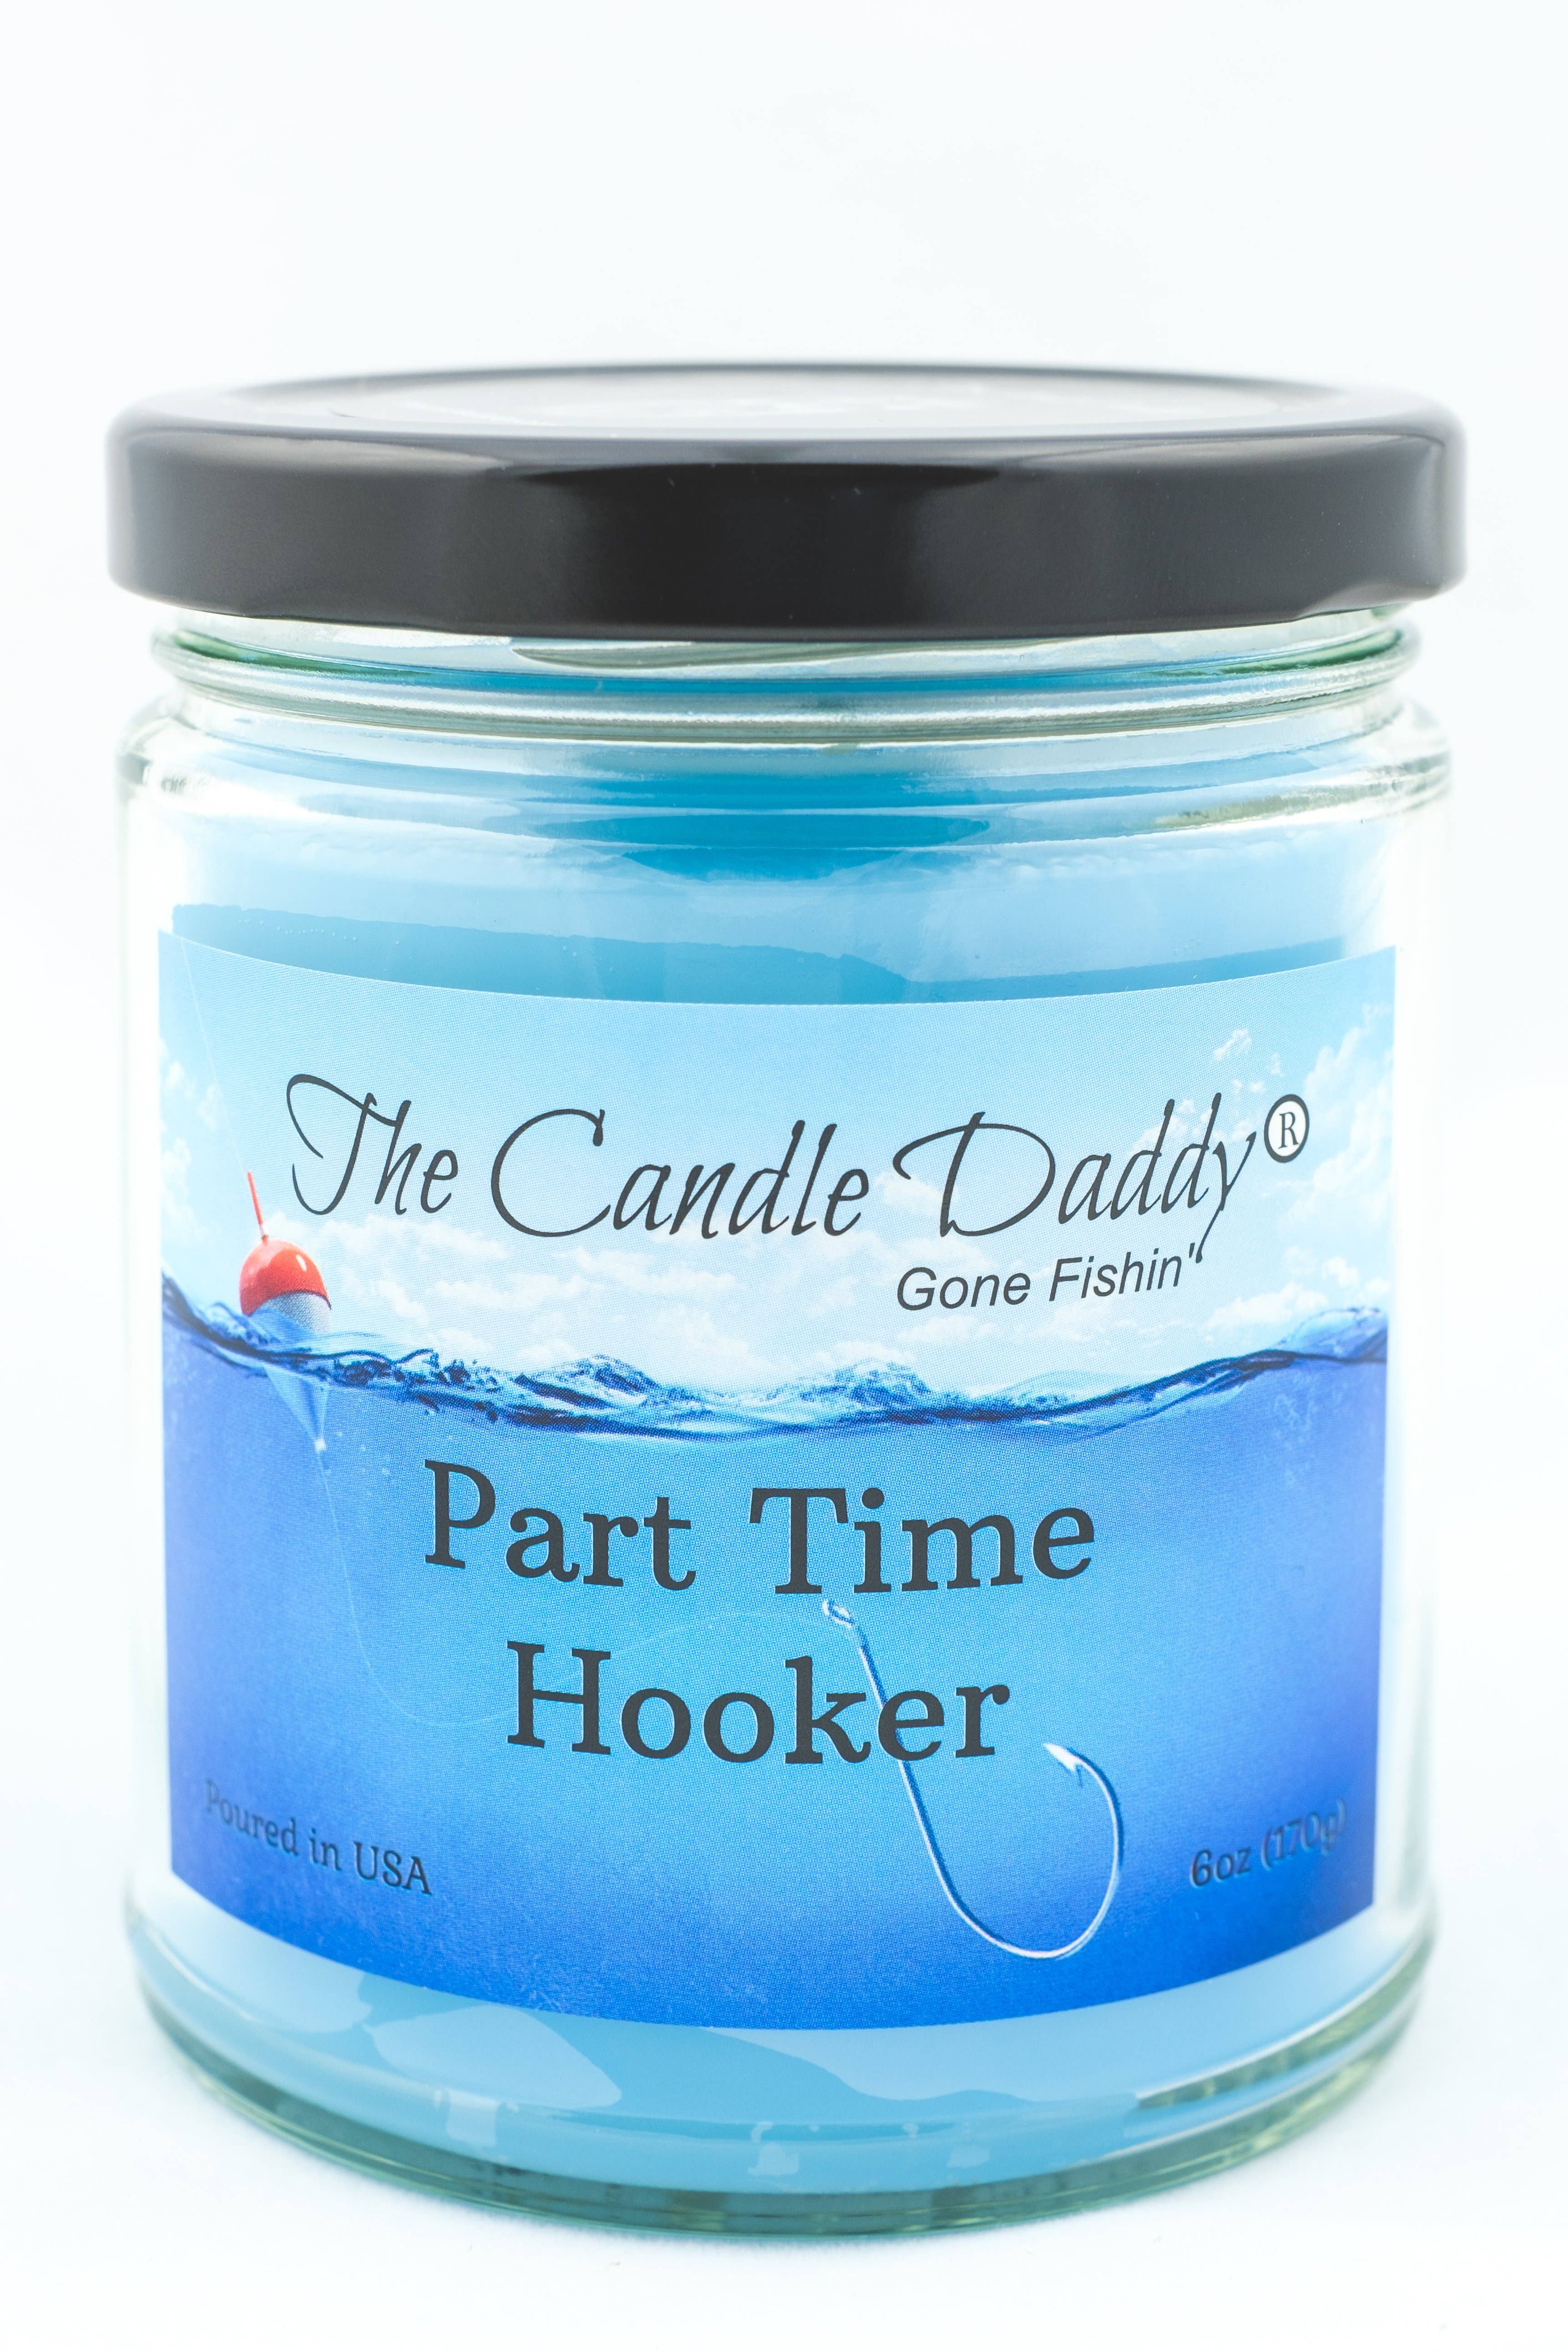 Swamp Ass Horribly Hilarious Scented 6oz Candle 40 Hour Burn The Candle Daddy 